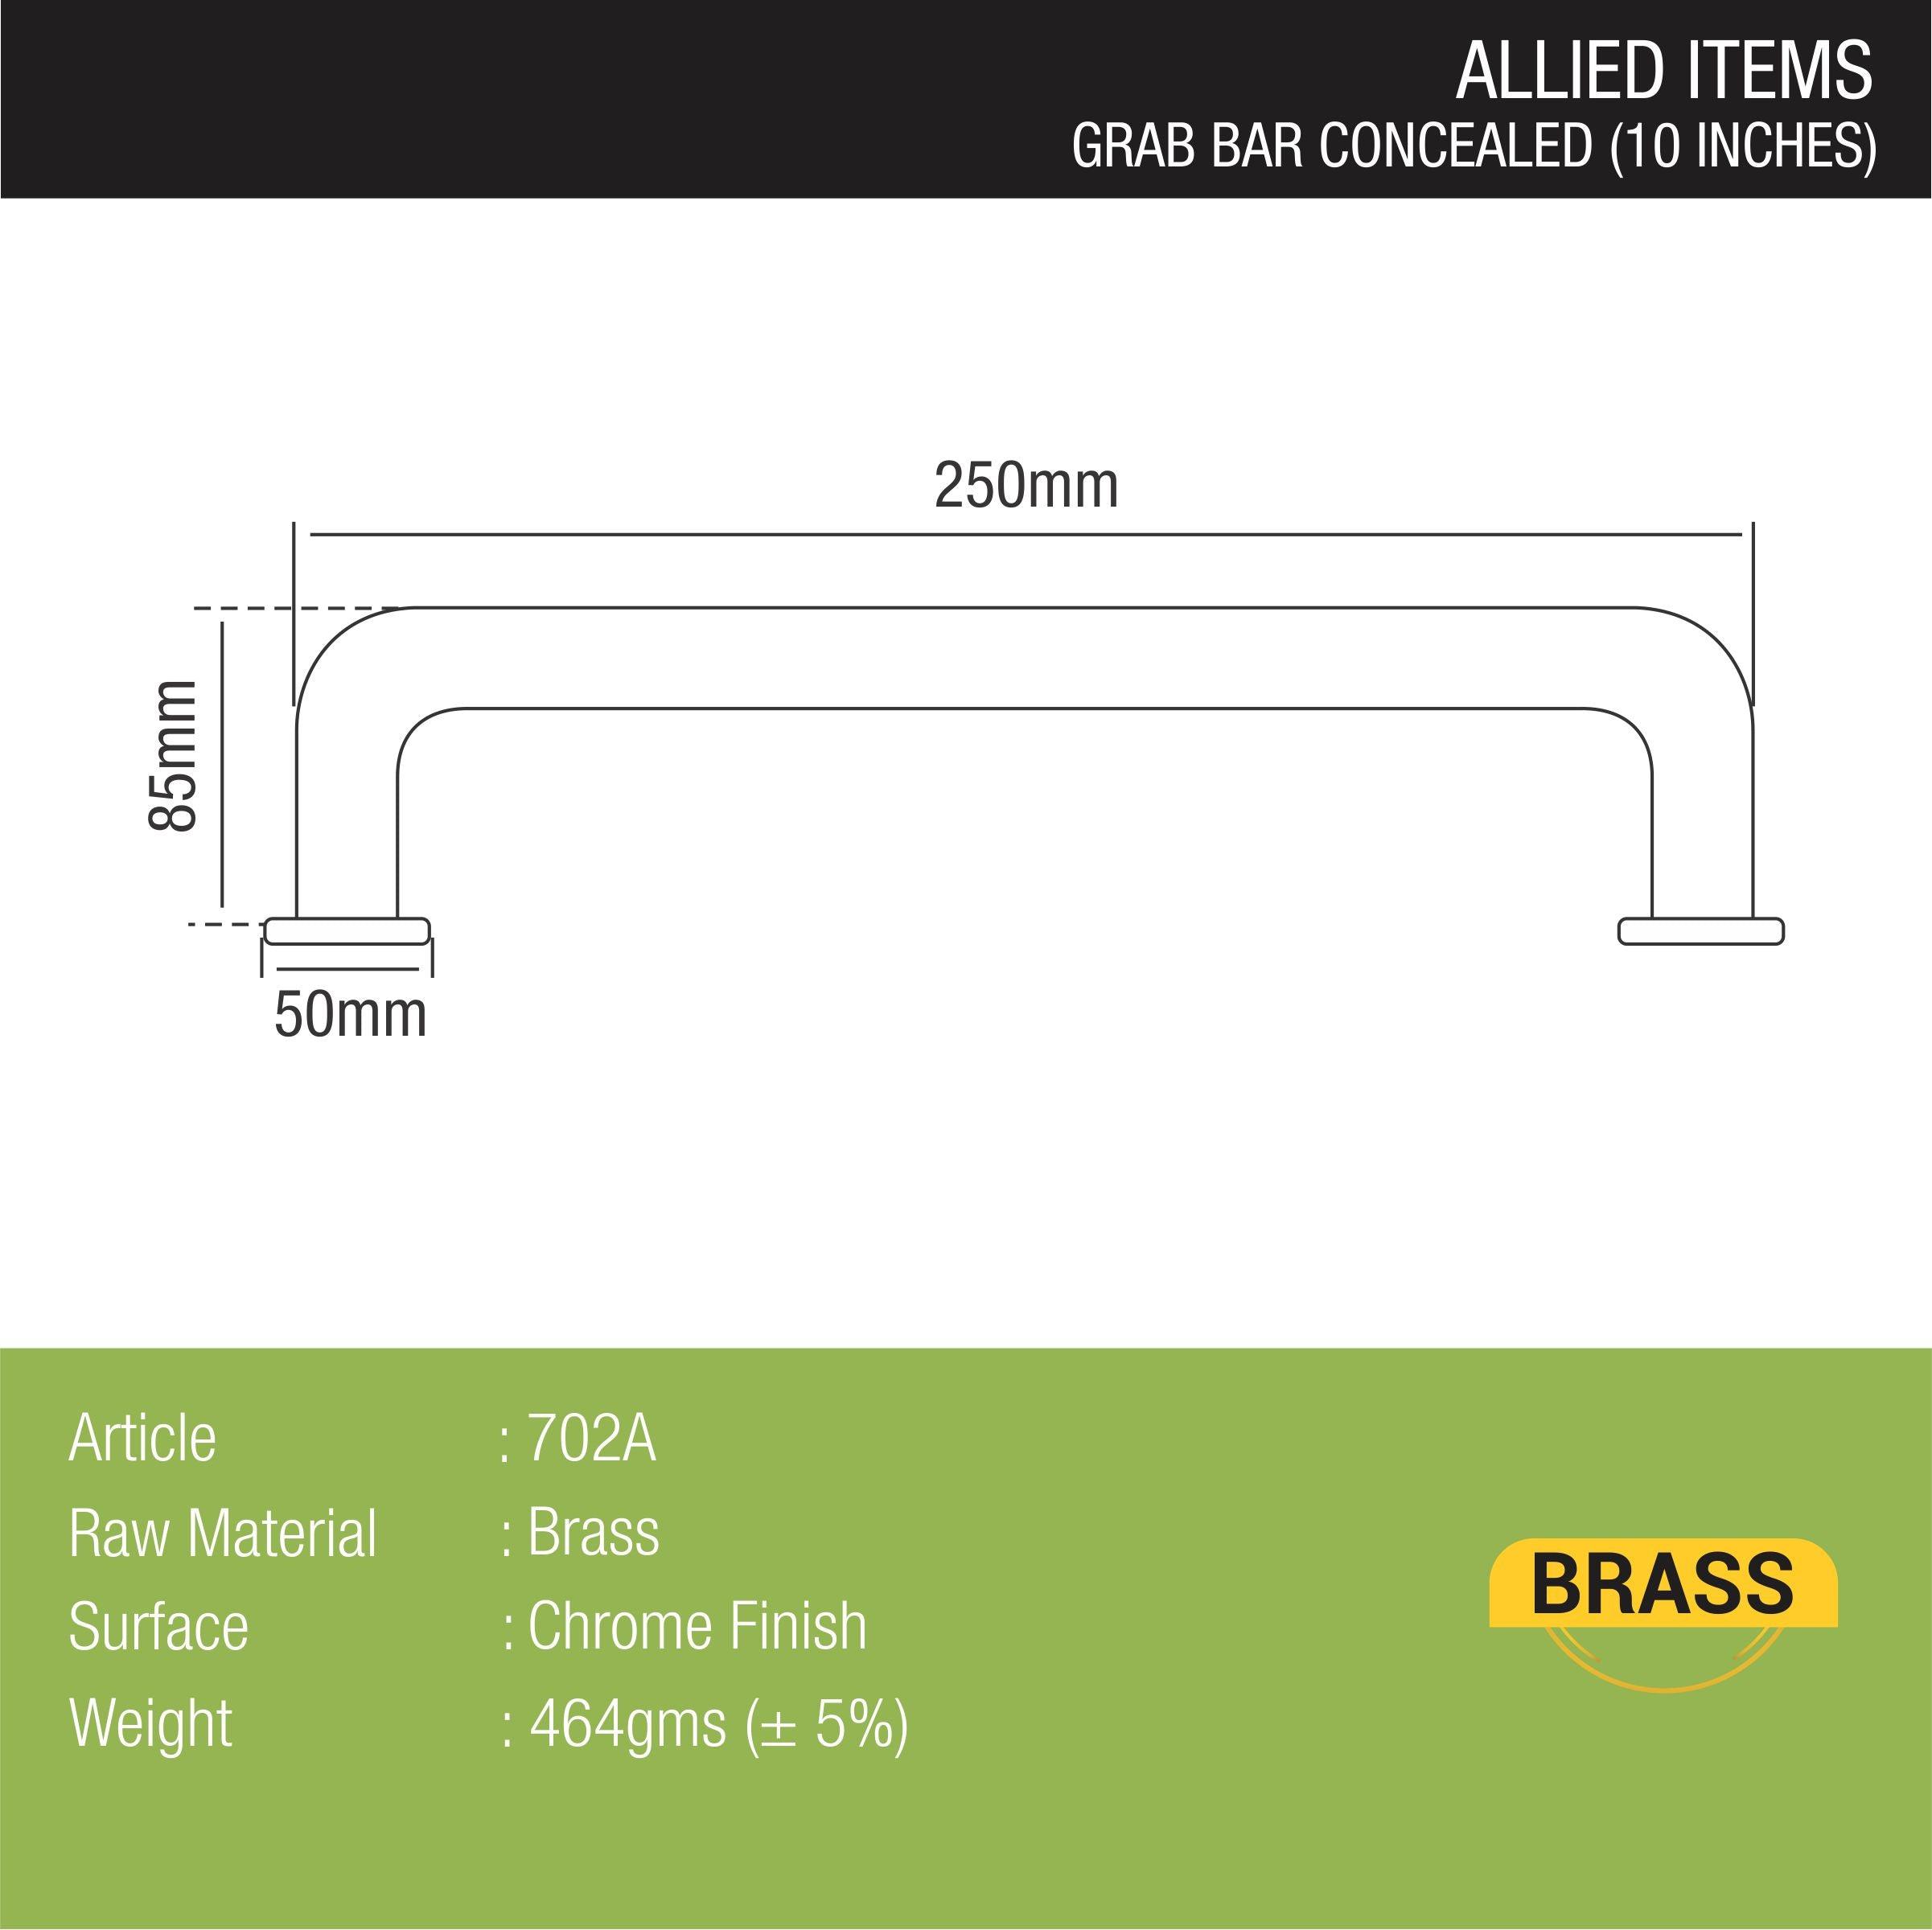 Brass Concealed Grab Bar (10 Inches) sizes and dimensions